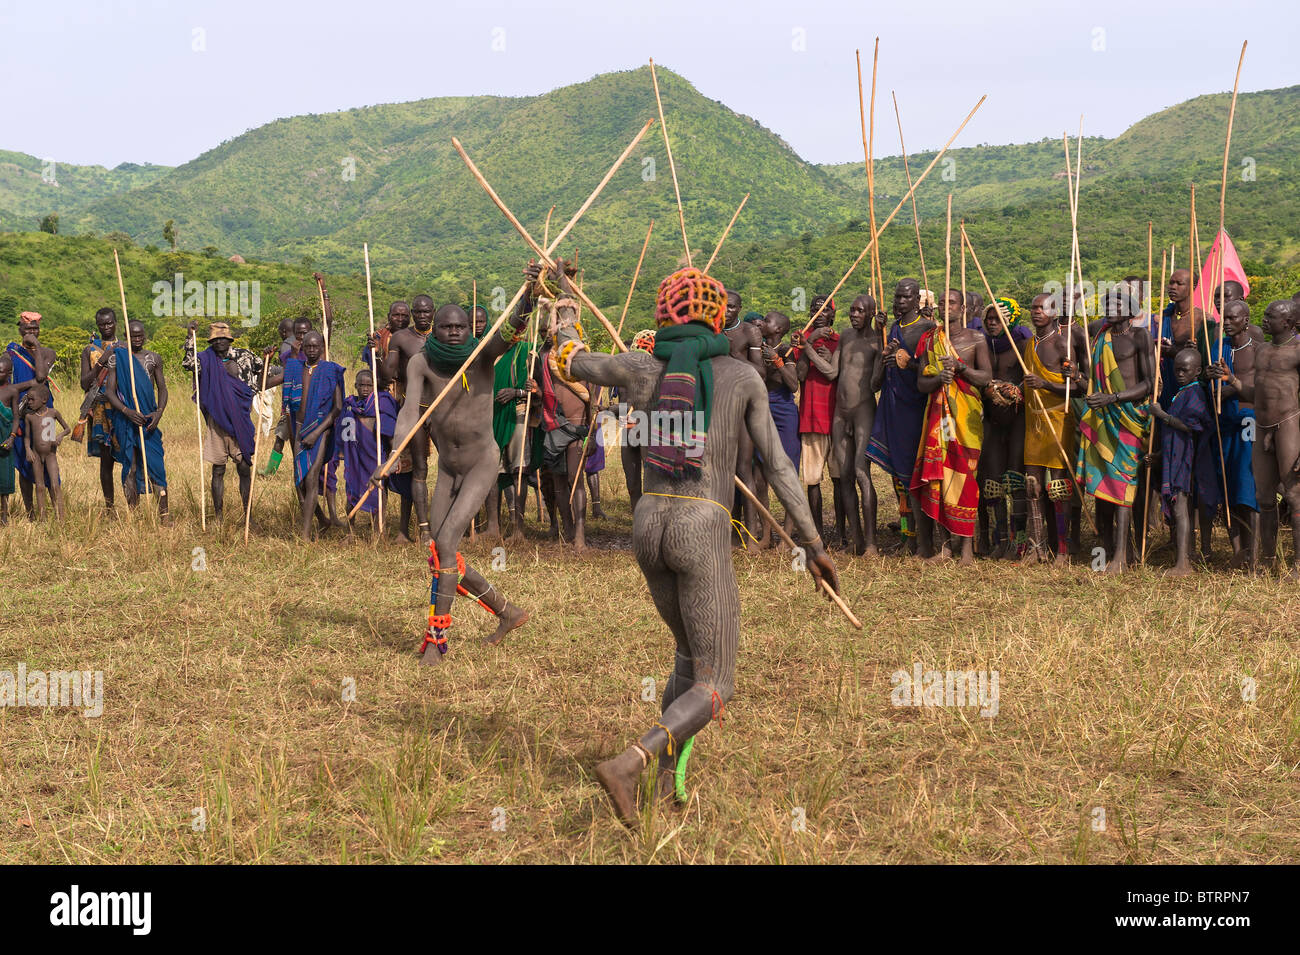 Donga stick fighters, Surma tribe, Tulgit, Omo River Valley, Ethiopia,  Africa Stock Photo - Alamy